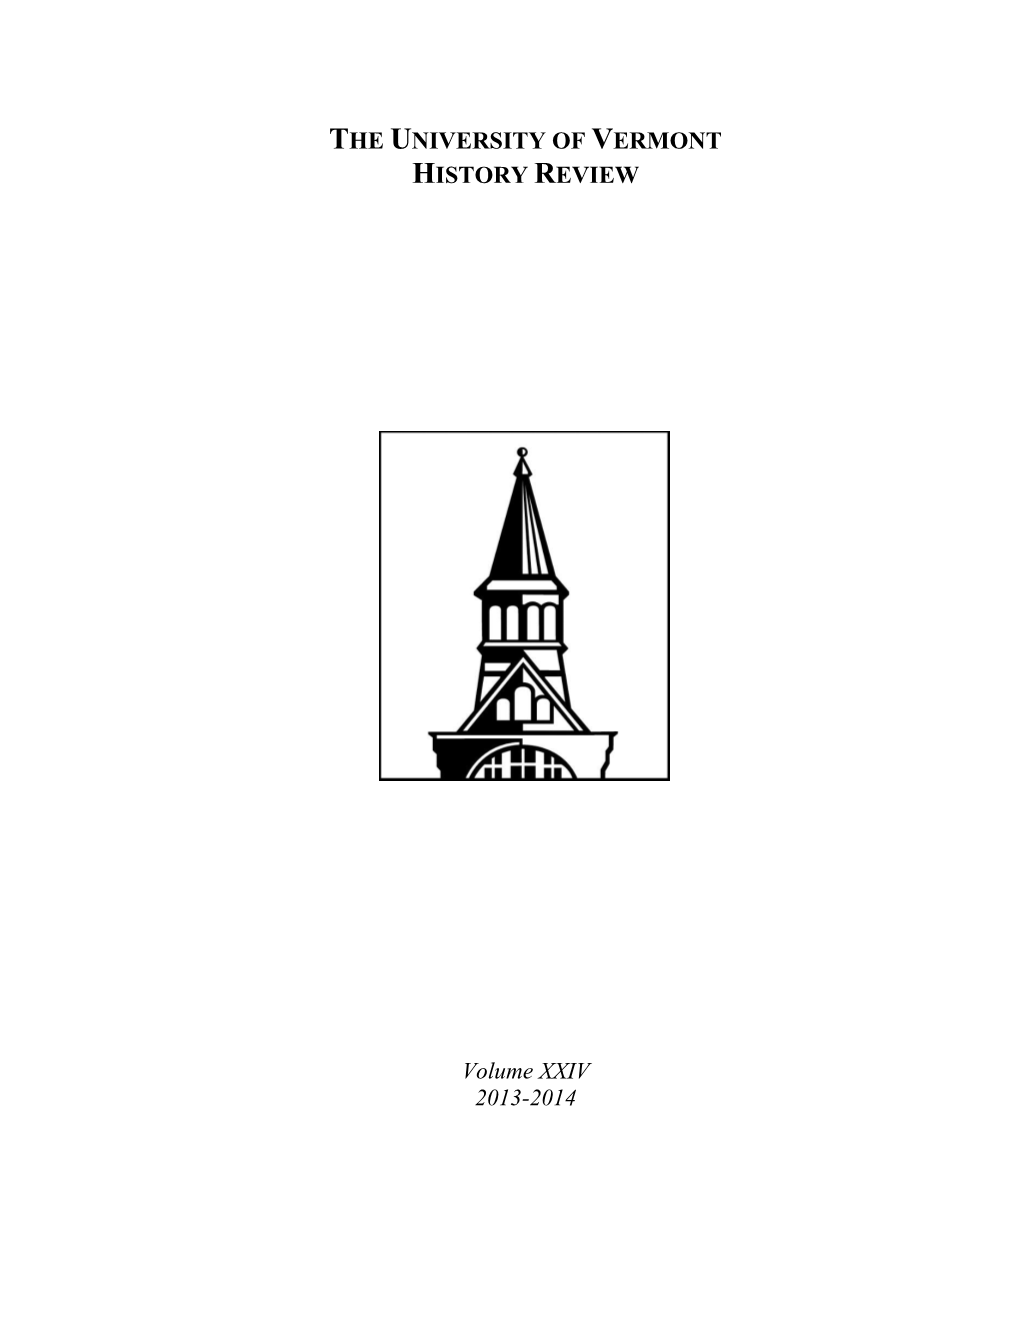 The University of Vermont History Review, Volume XXIV 2013-2014